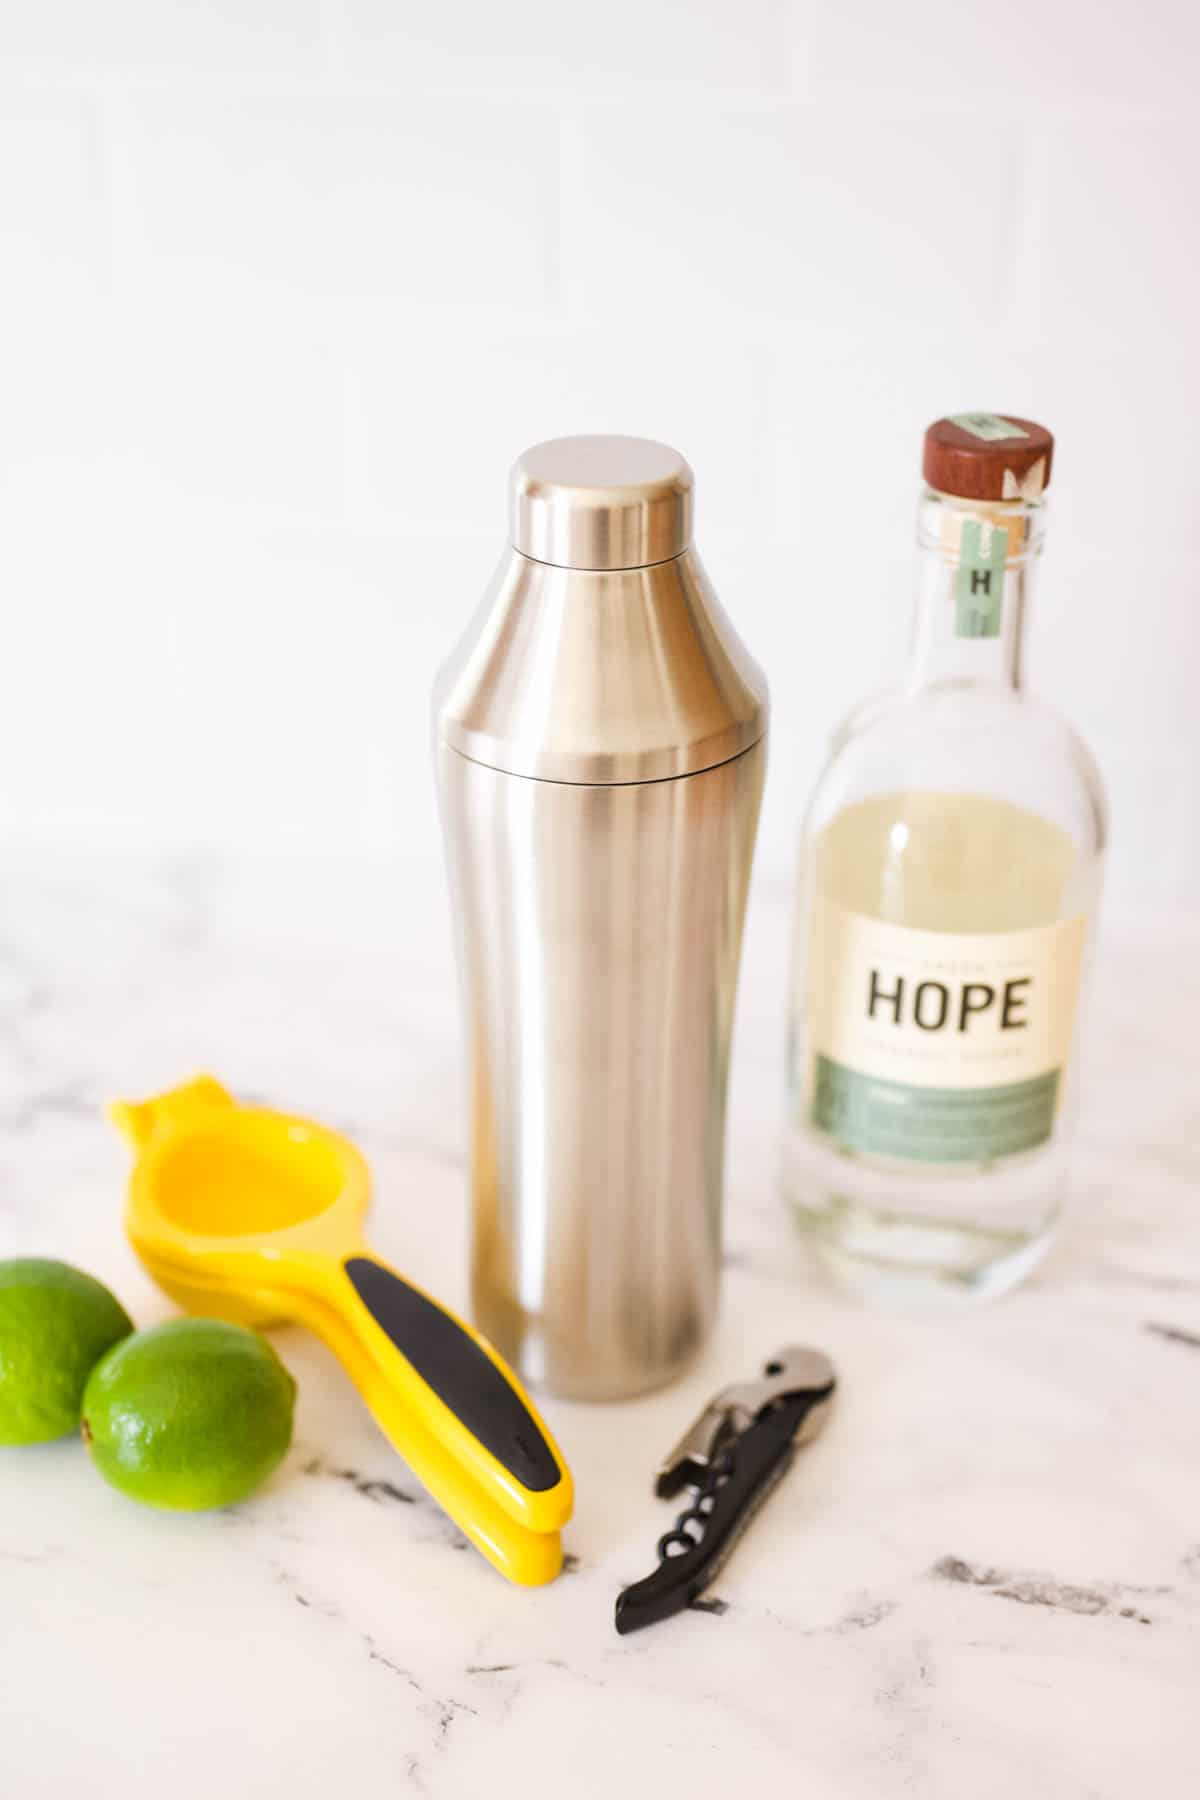 A bottle of vodka, cocktail shaker, limes and a citrus squeezer on a table.